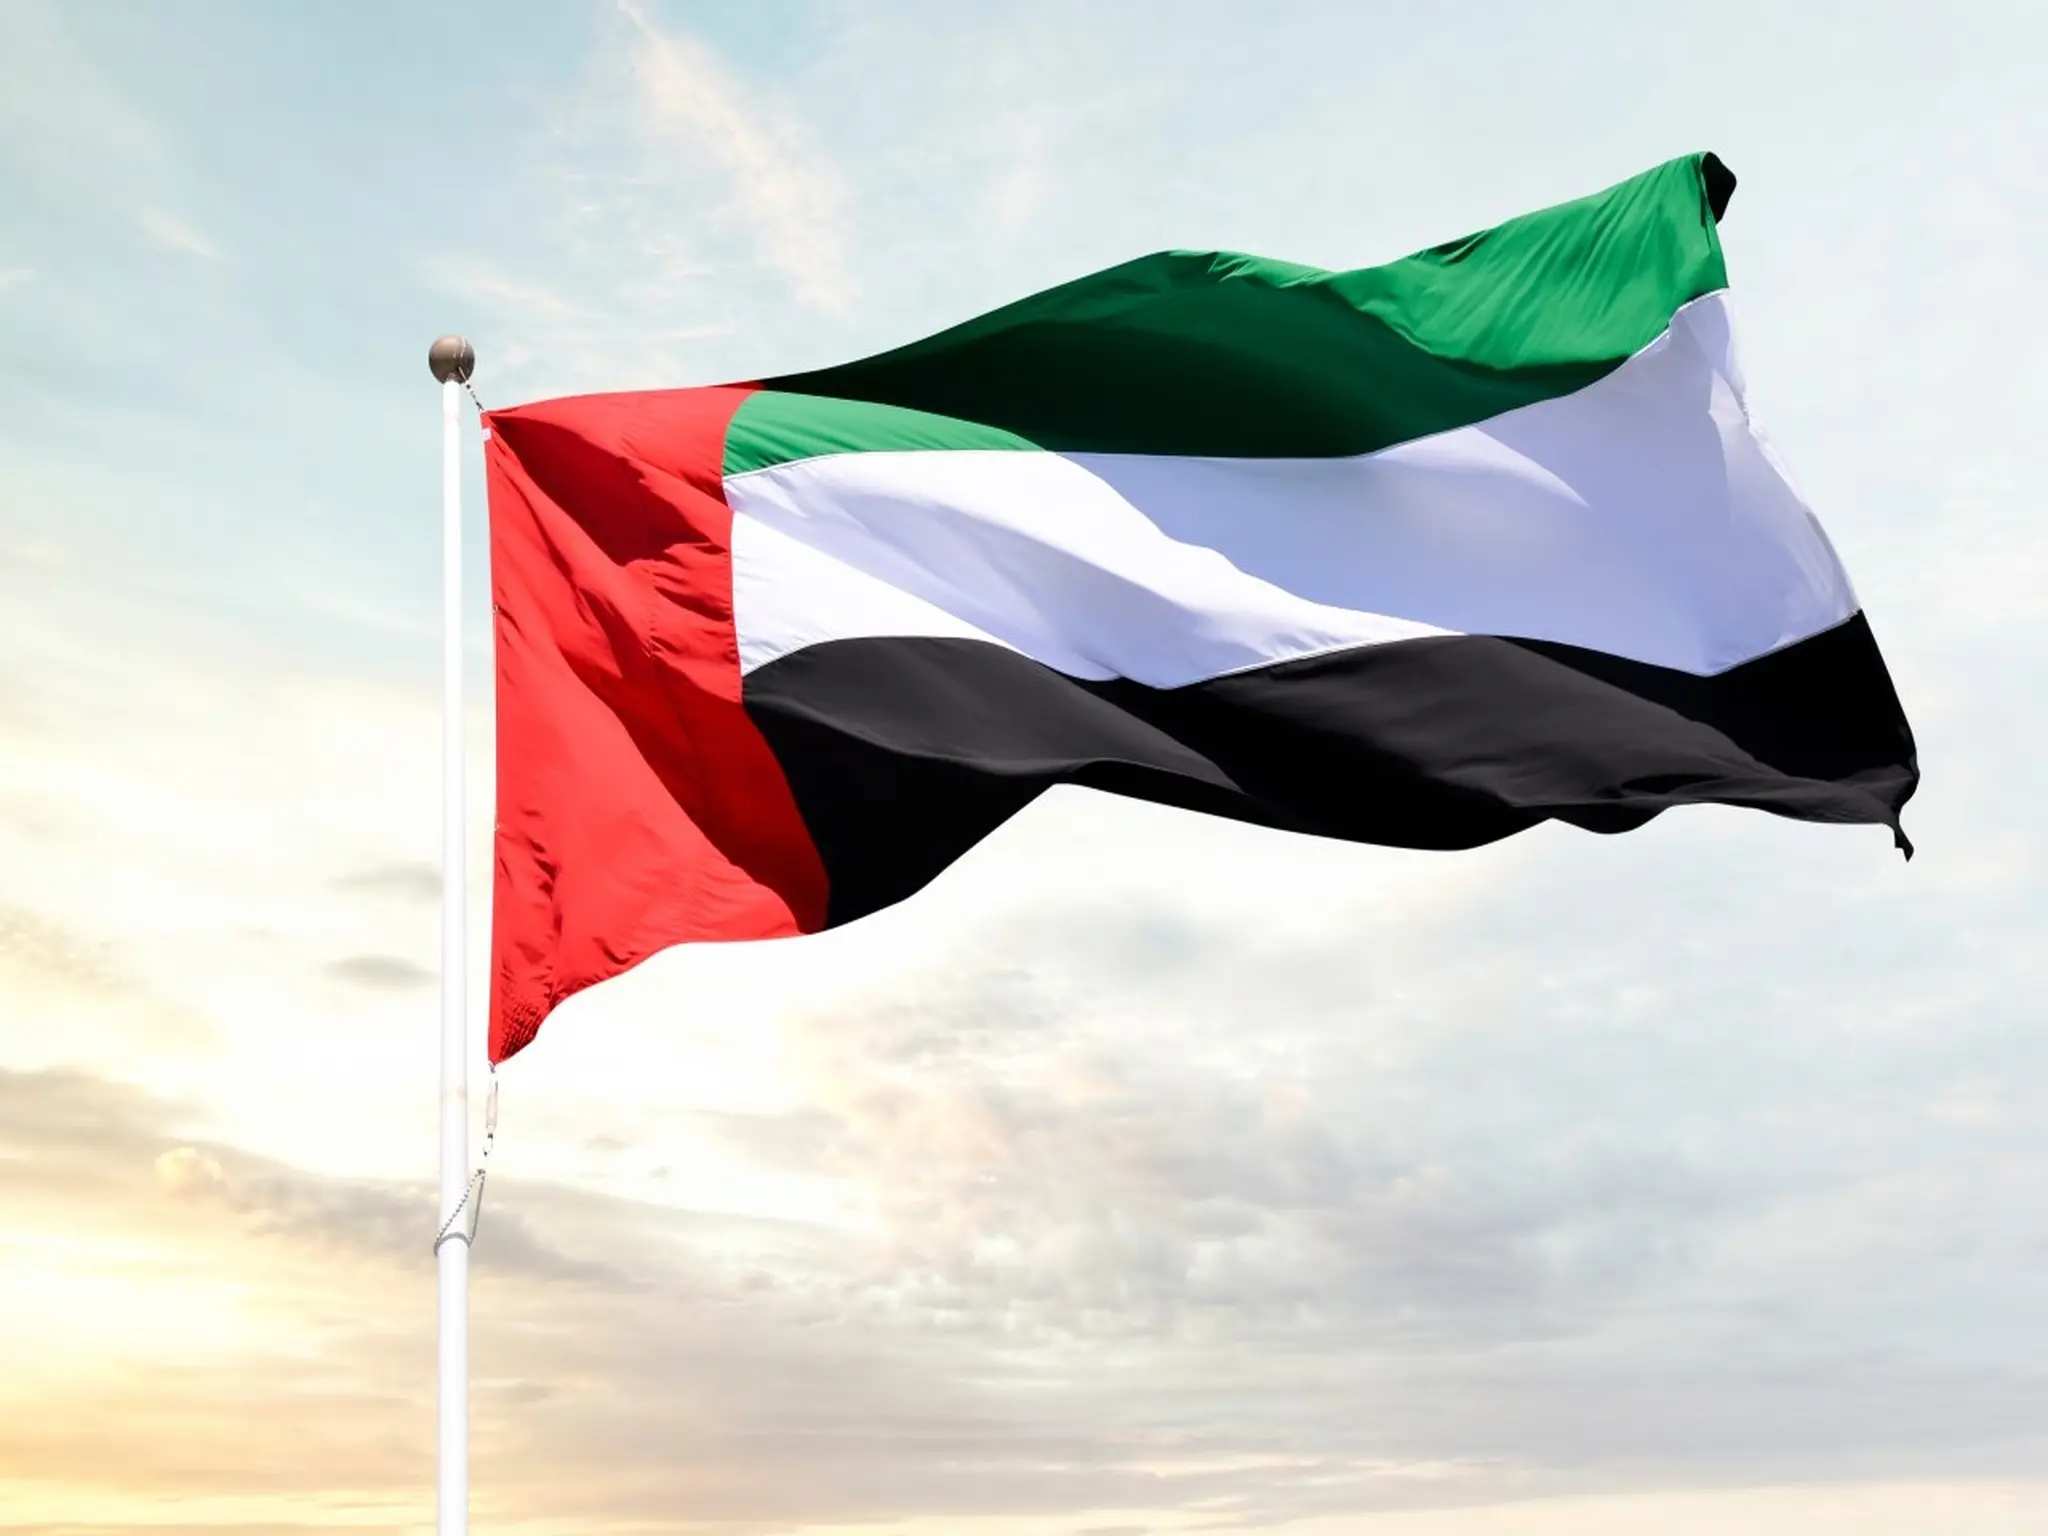 UAE issues a decision regarding travelers arriving and departing from the country